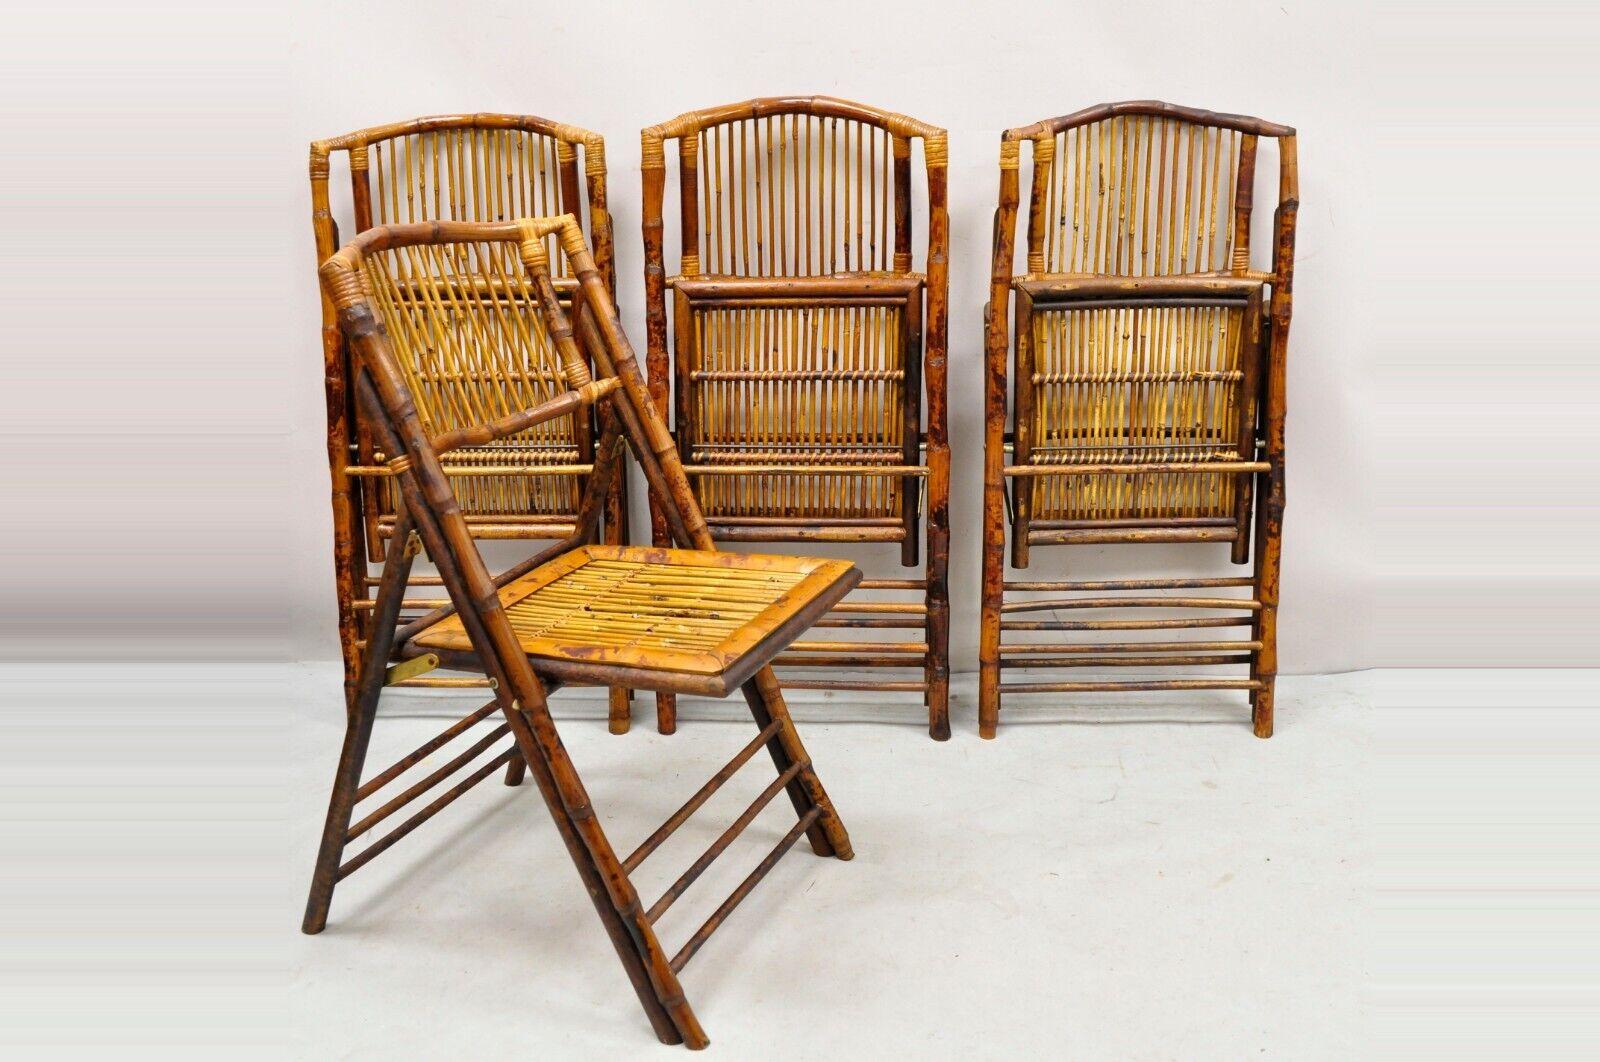 Bamboo Wooden Folding Chairs for Game Table or Events, Set of 4 7